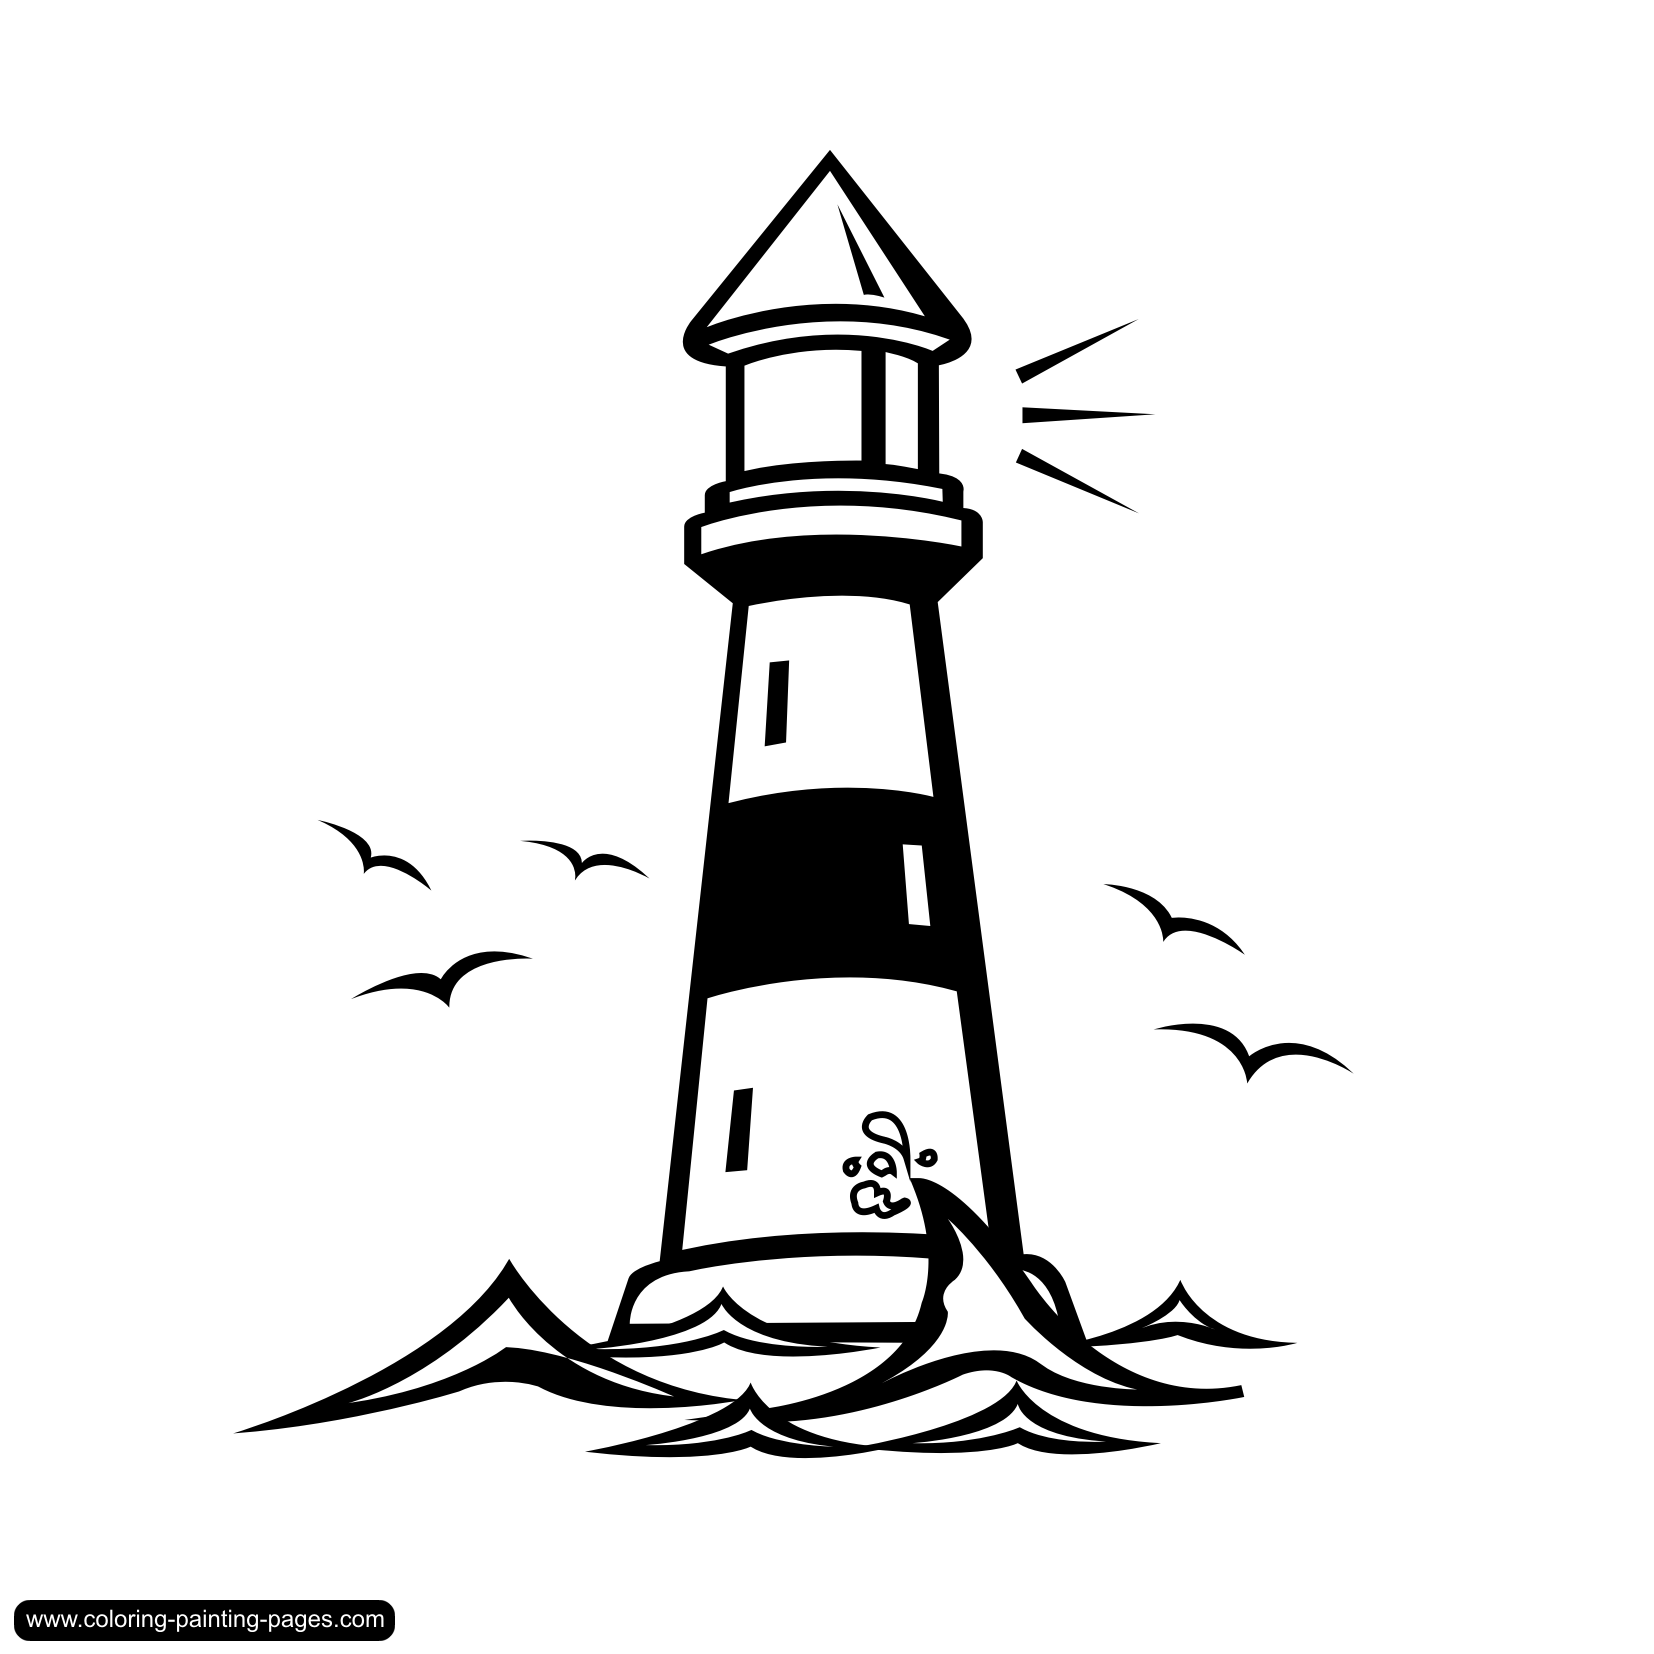 Lighthouse - Coloring Pages for Kids and for Adults